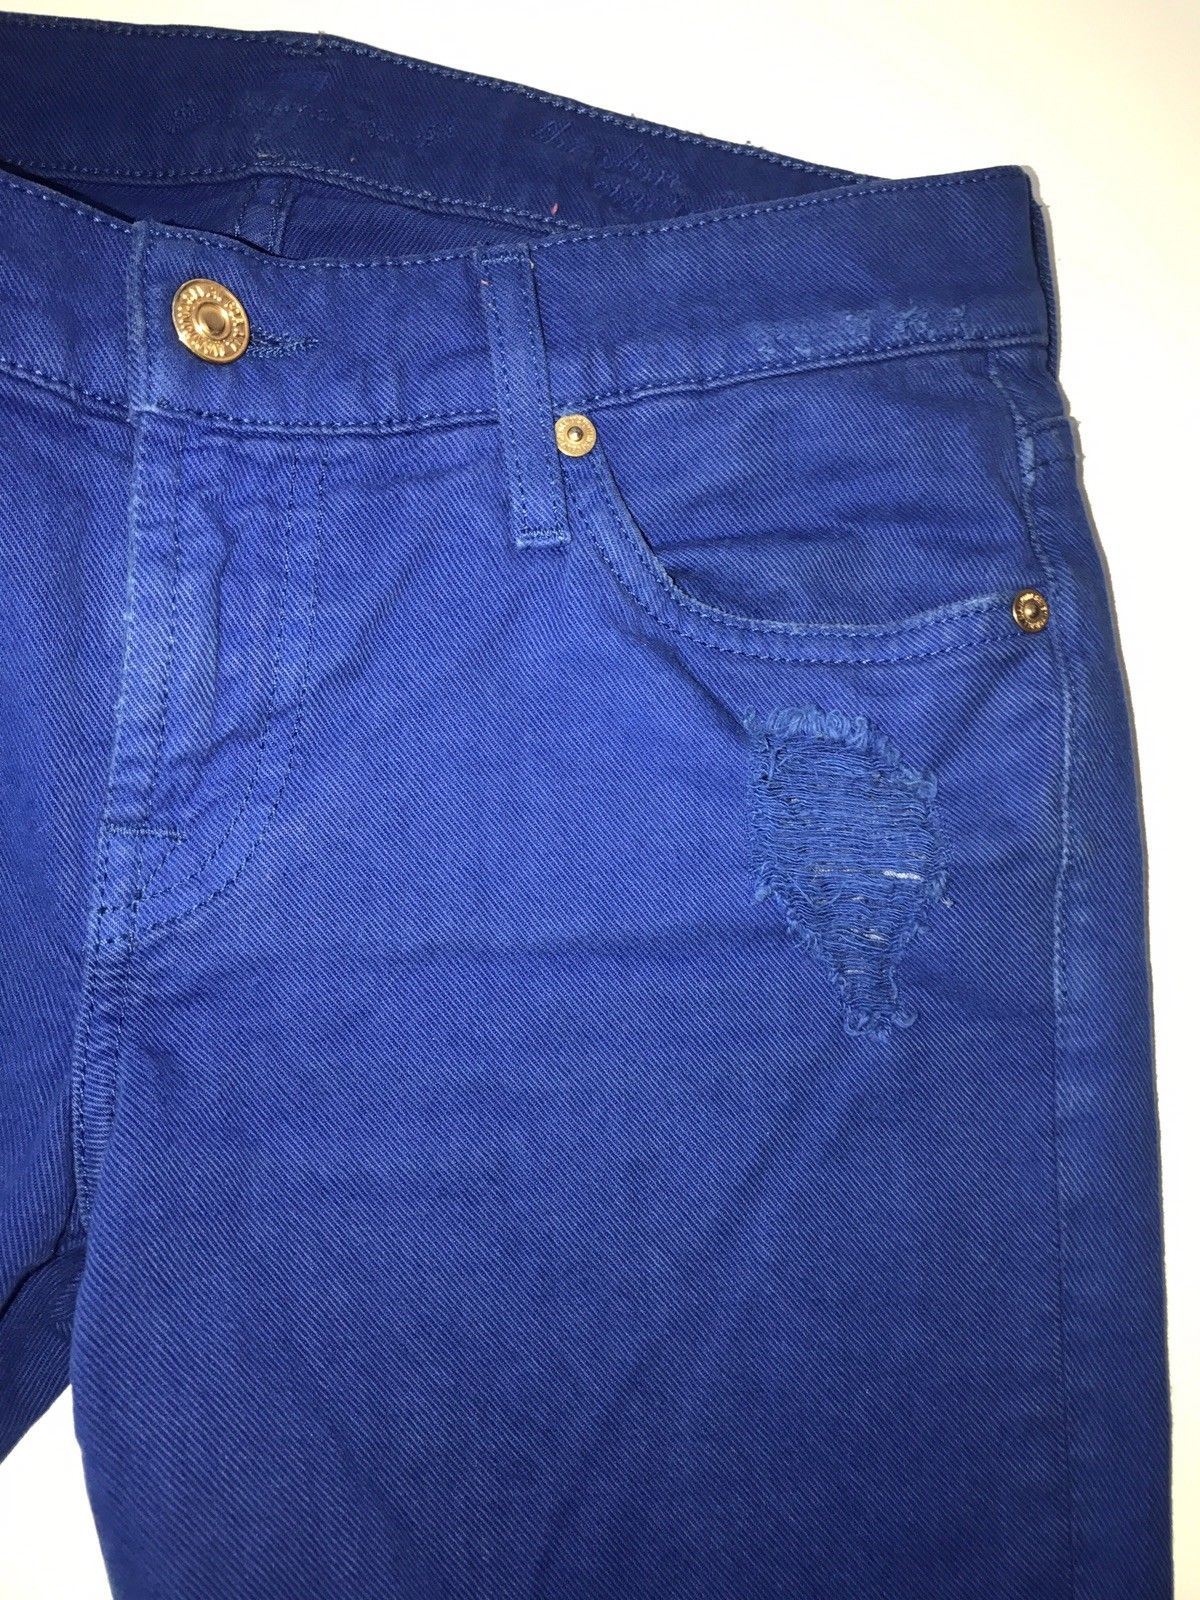 7 For All Mankind Cotton Women's Regular Fit Blue Jeans Size 26 US